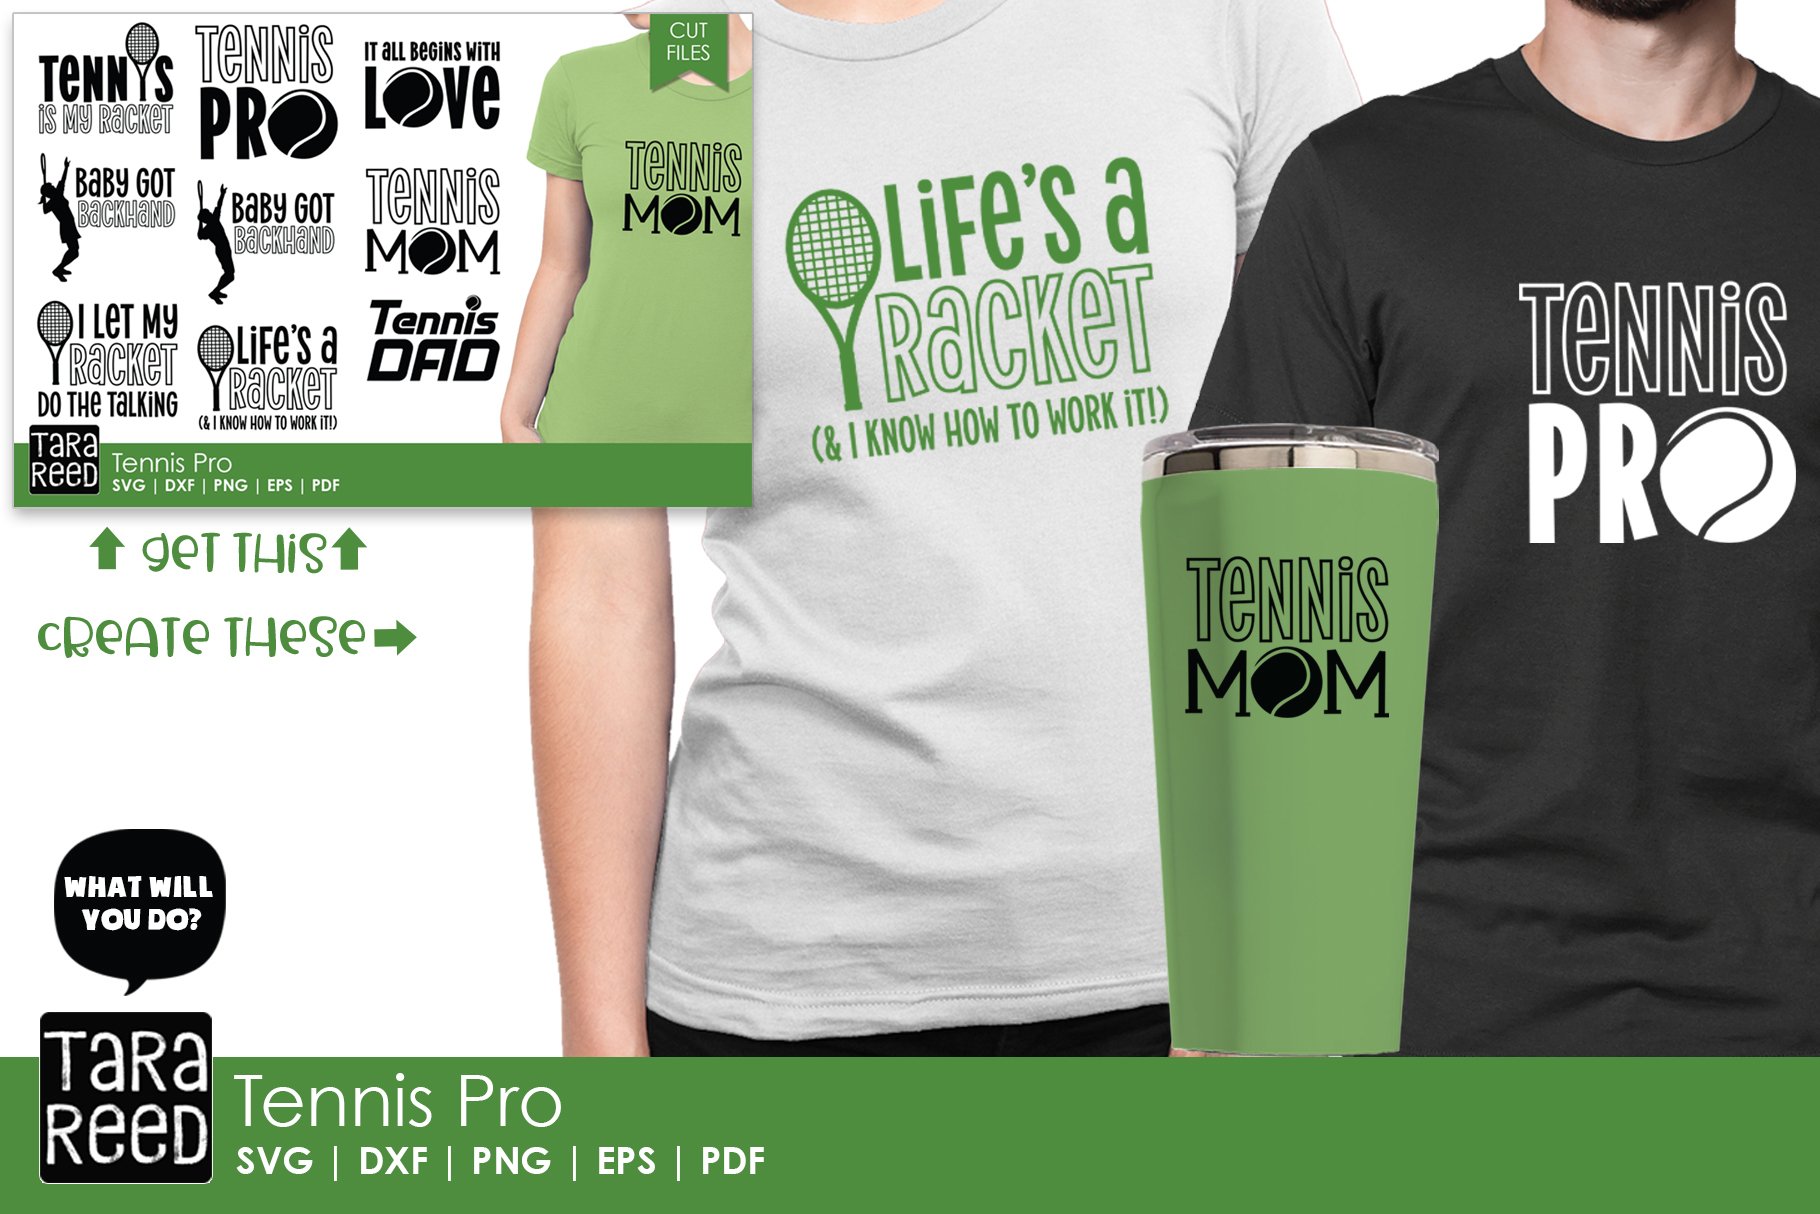 Some examples of using tennis prints.